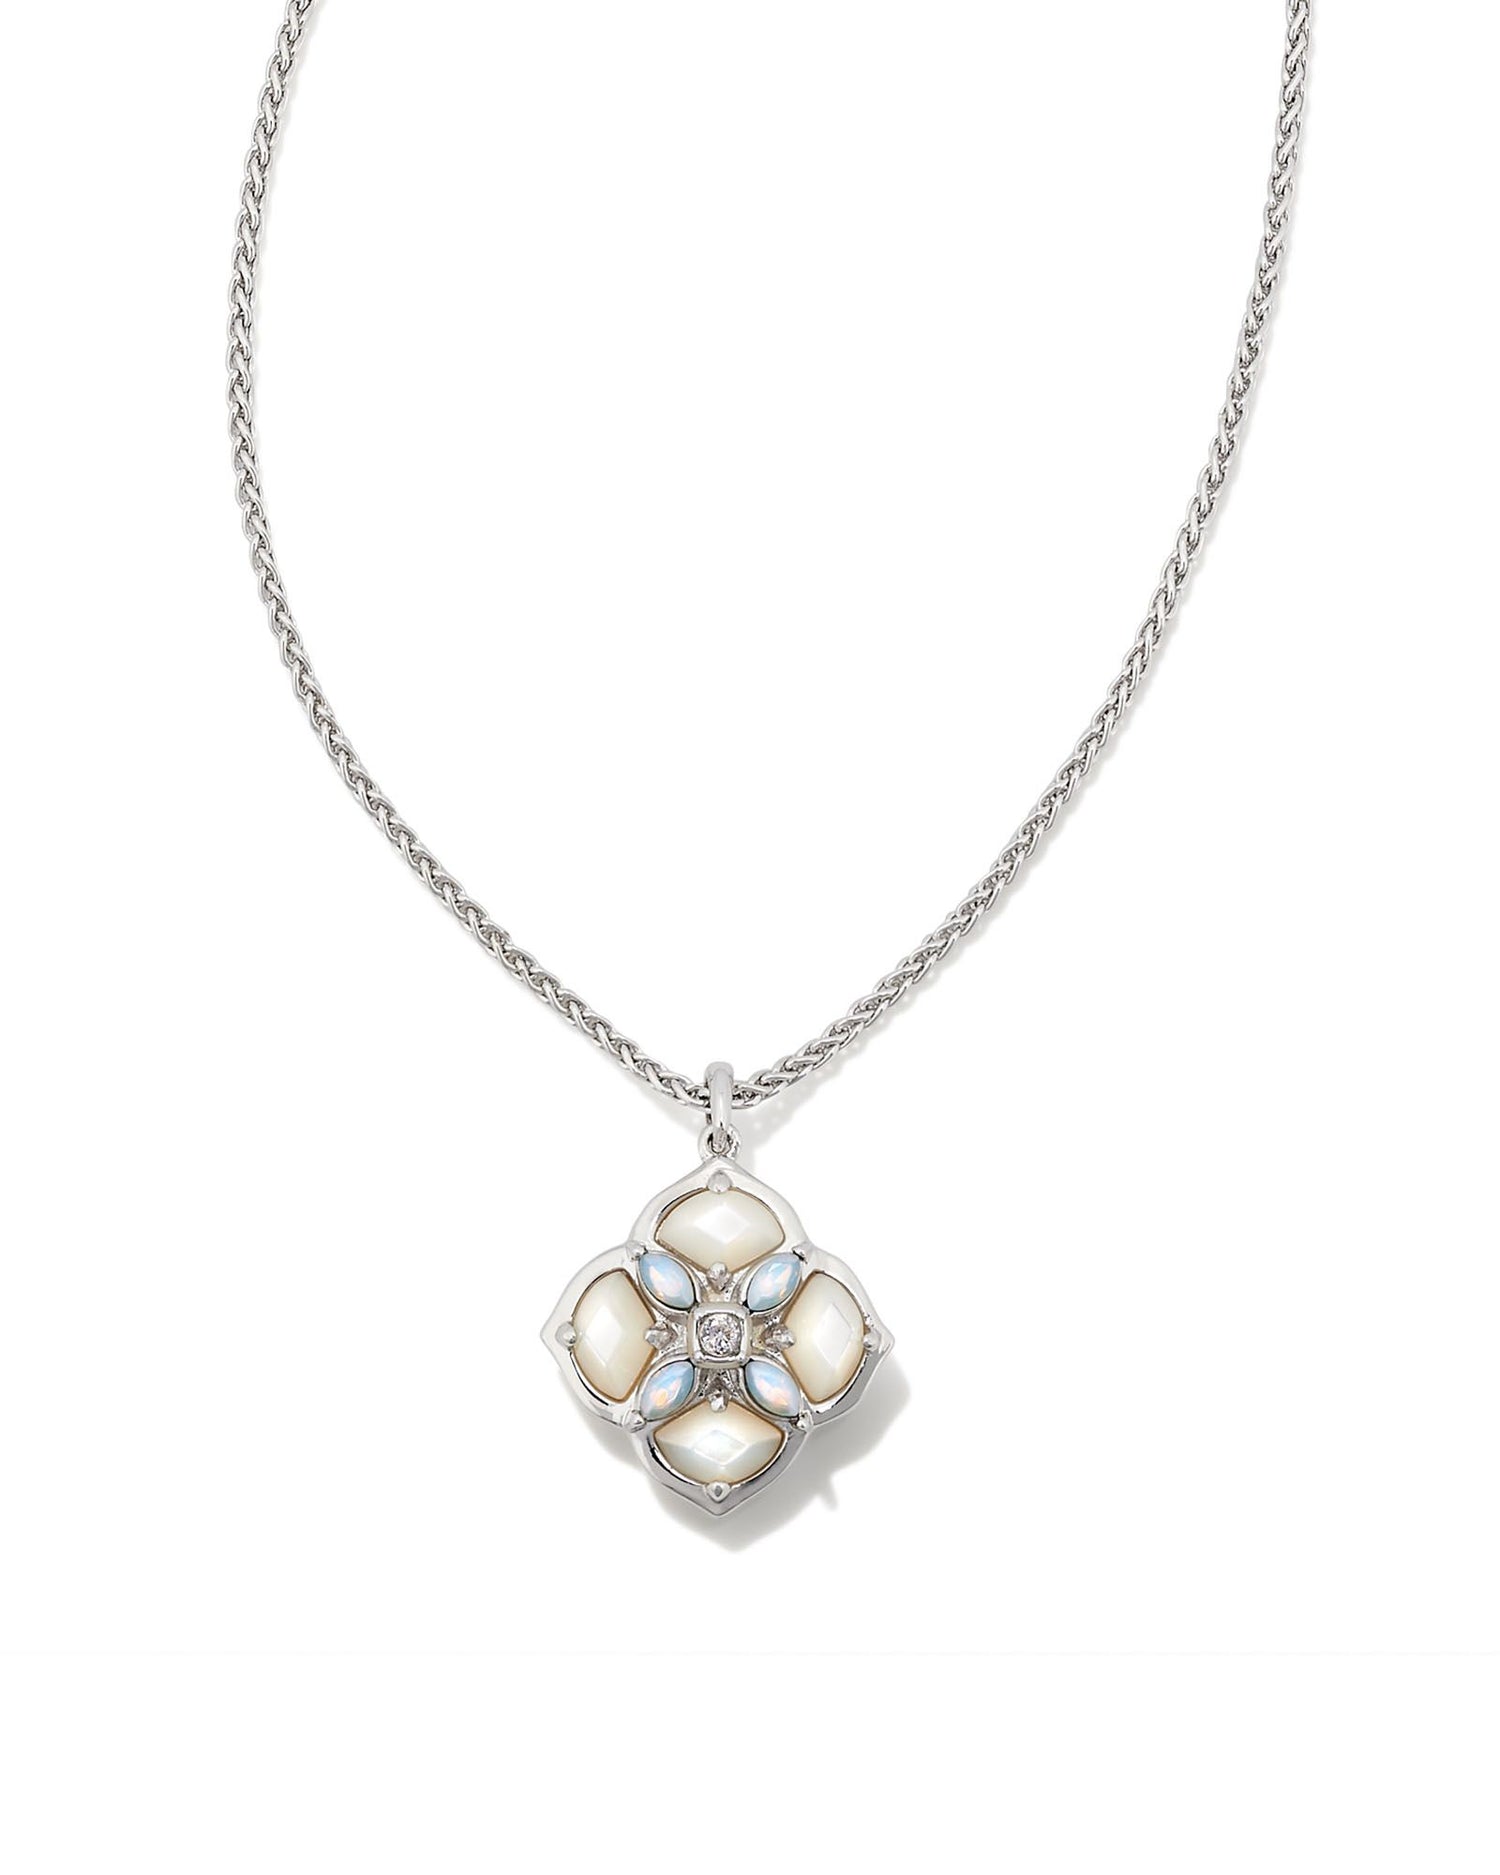 Our signature logo meets gorgeous stone detailing for the first time in the Dira Stone Gold Short Pendant Necklace. Featuring custom-cut stones and gems assembled into our logo shape, this pendant is bound to be a new favorite in your collection. The metal is 24k rhodium plated over brass with white stones. 